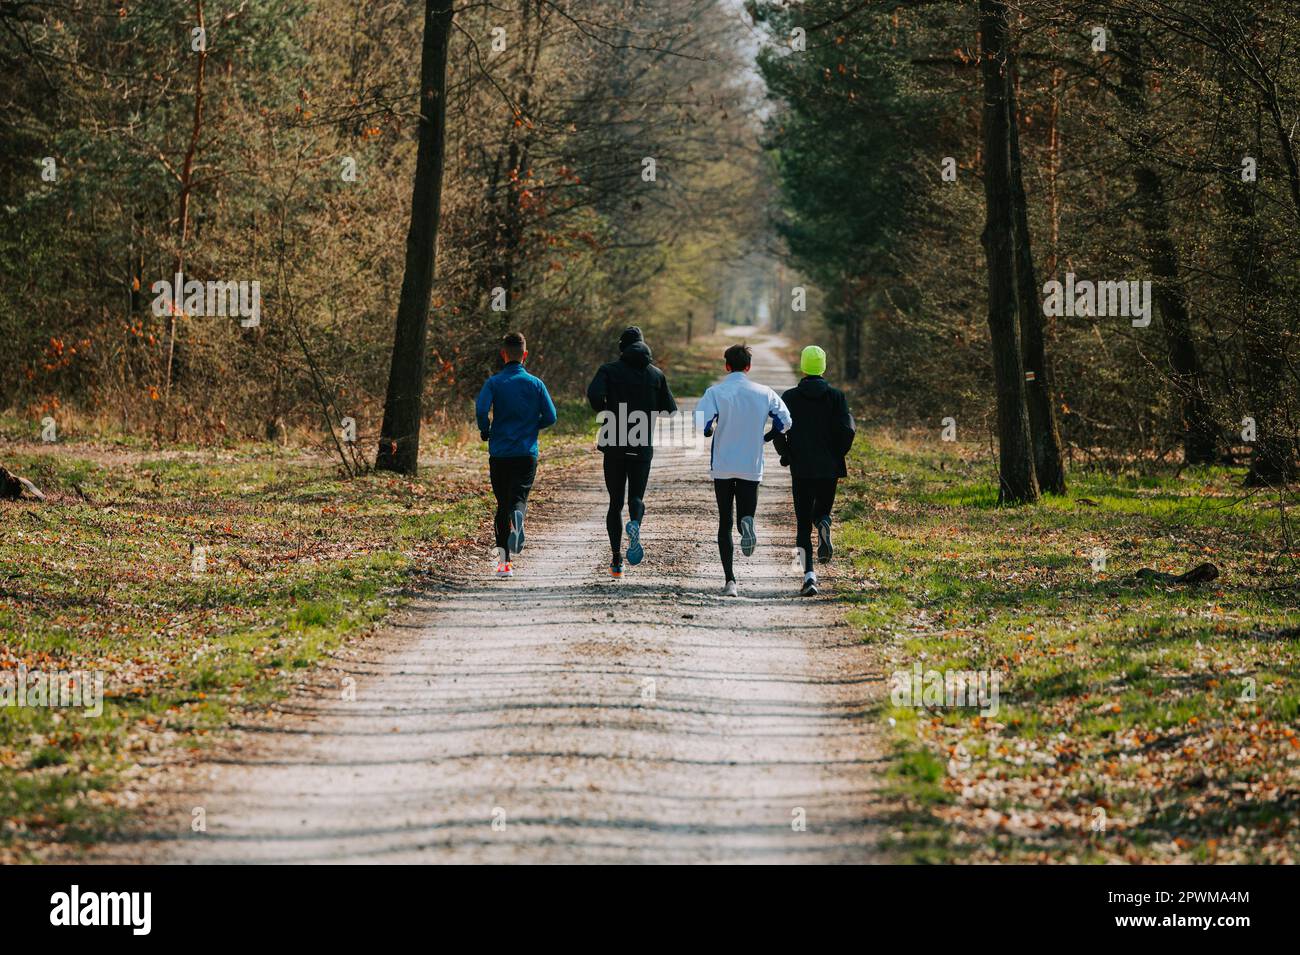 Teamwork Makes the Dream Work: Push Your Limits with These Experienced Runners on a Stunning Forest Trail. Stock Photo